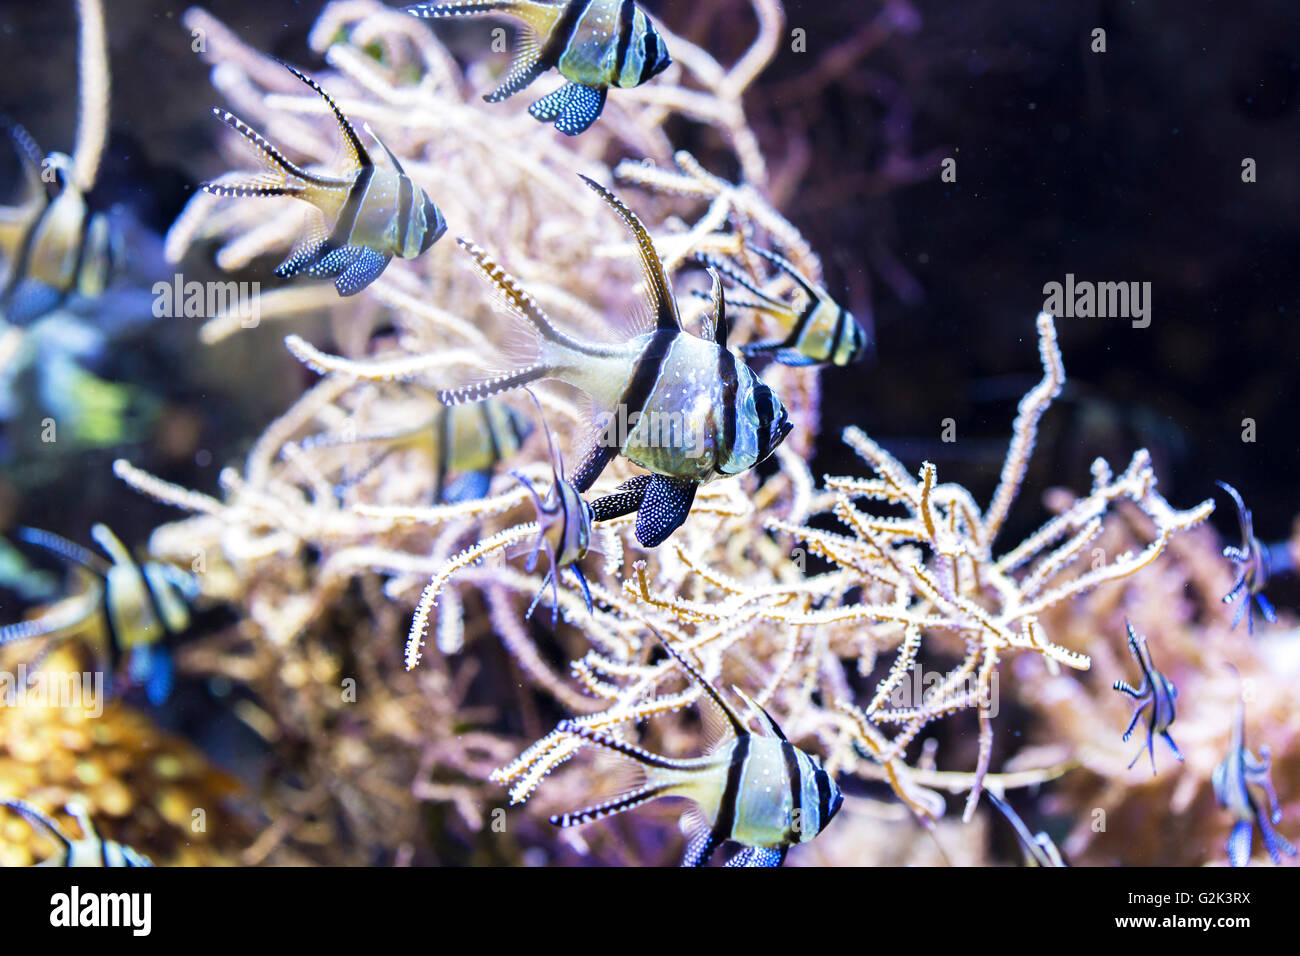 Tropical black and white fish swimming between the corals Stock Photo